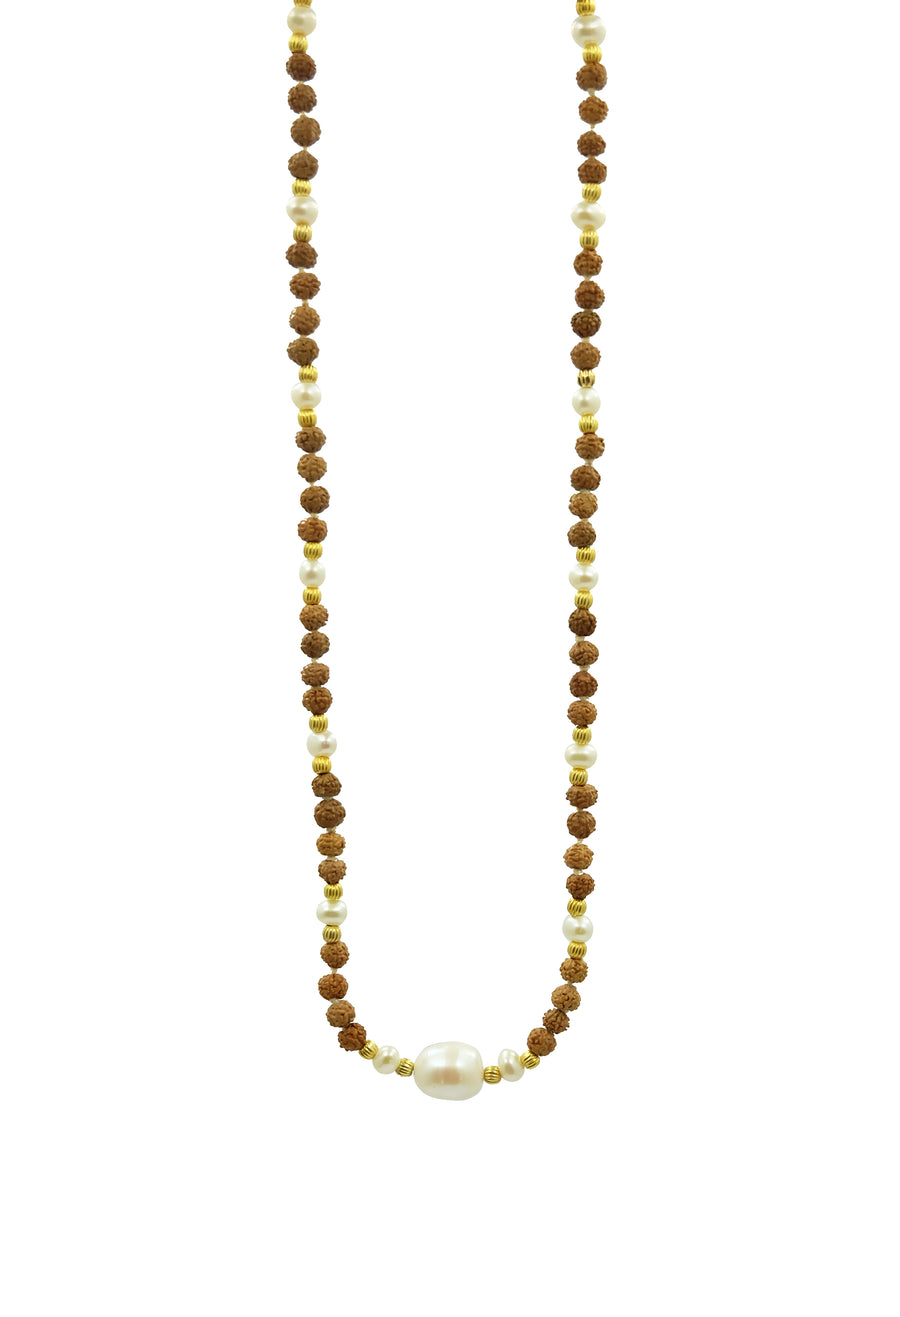 Mystic Moonlight is a choker length necklace hand-made from rudraksha seeds, pearls and 22k gold accents.